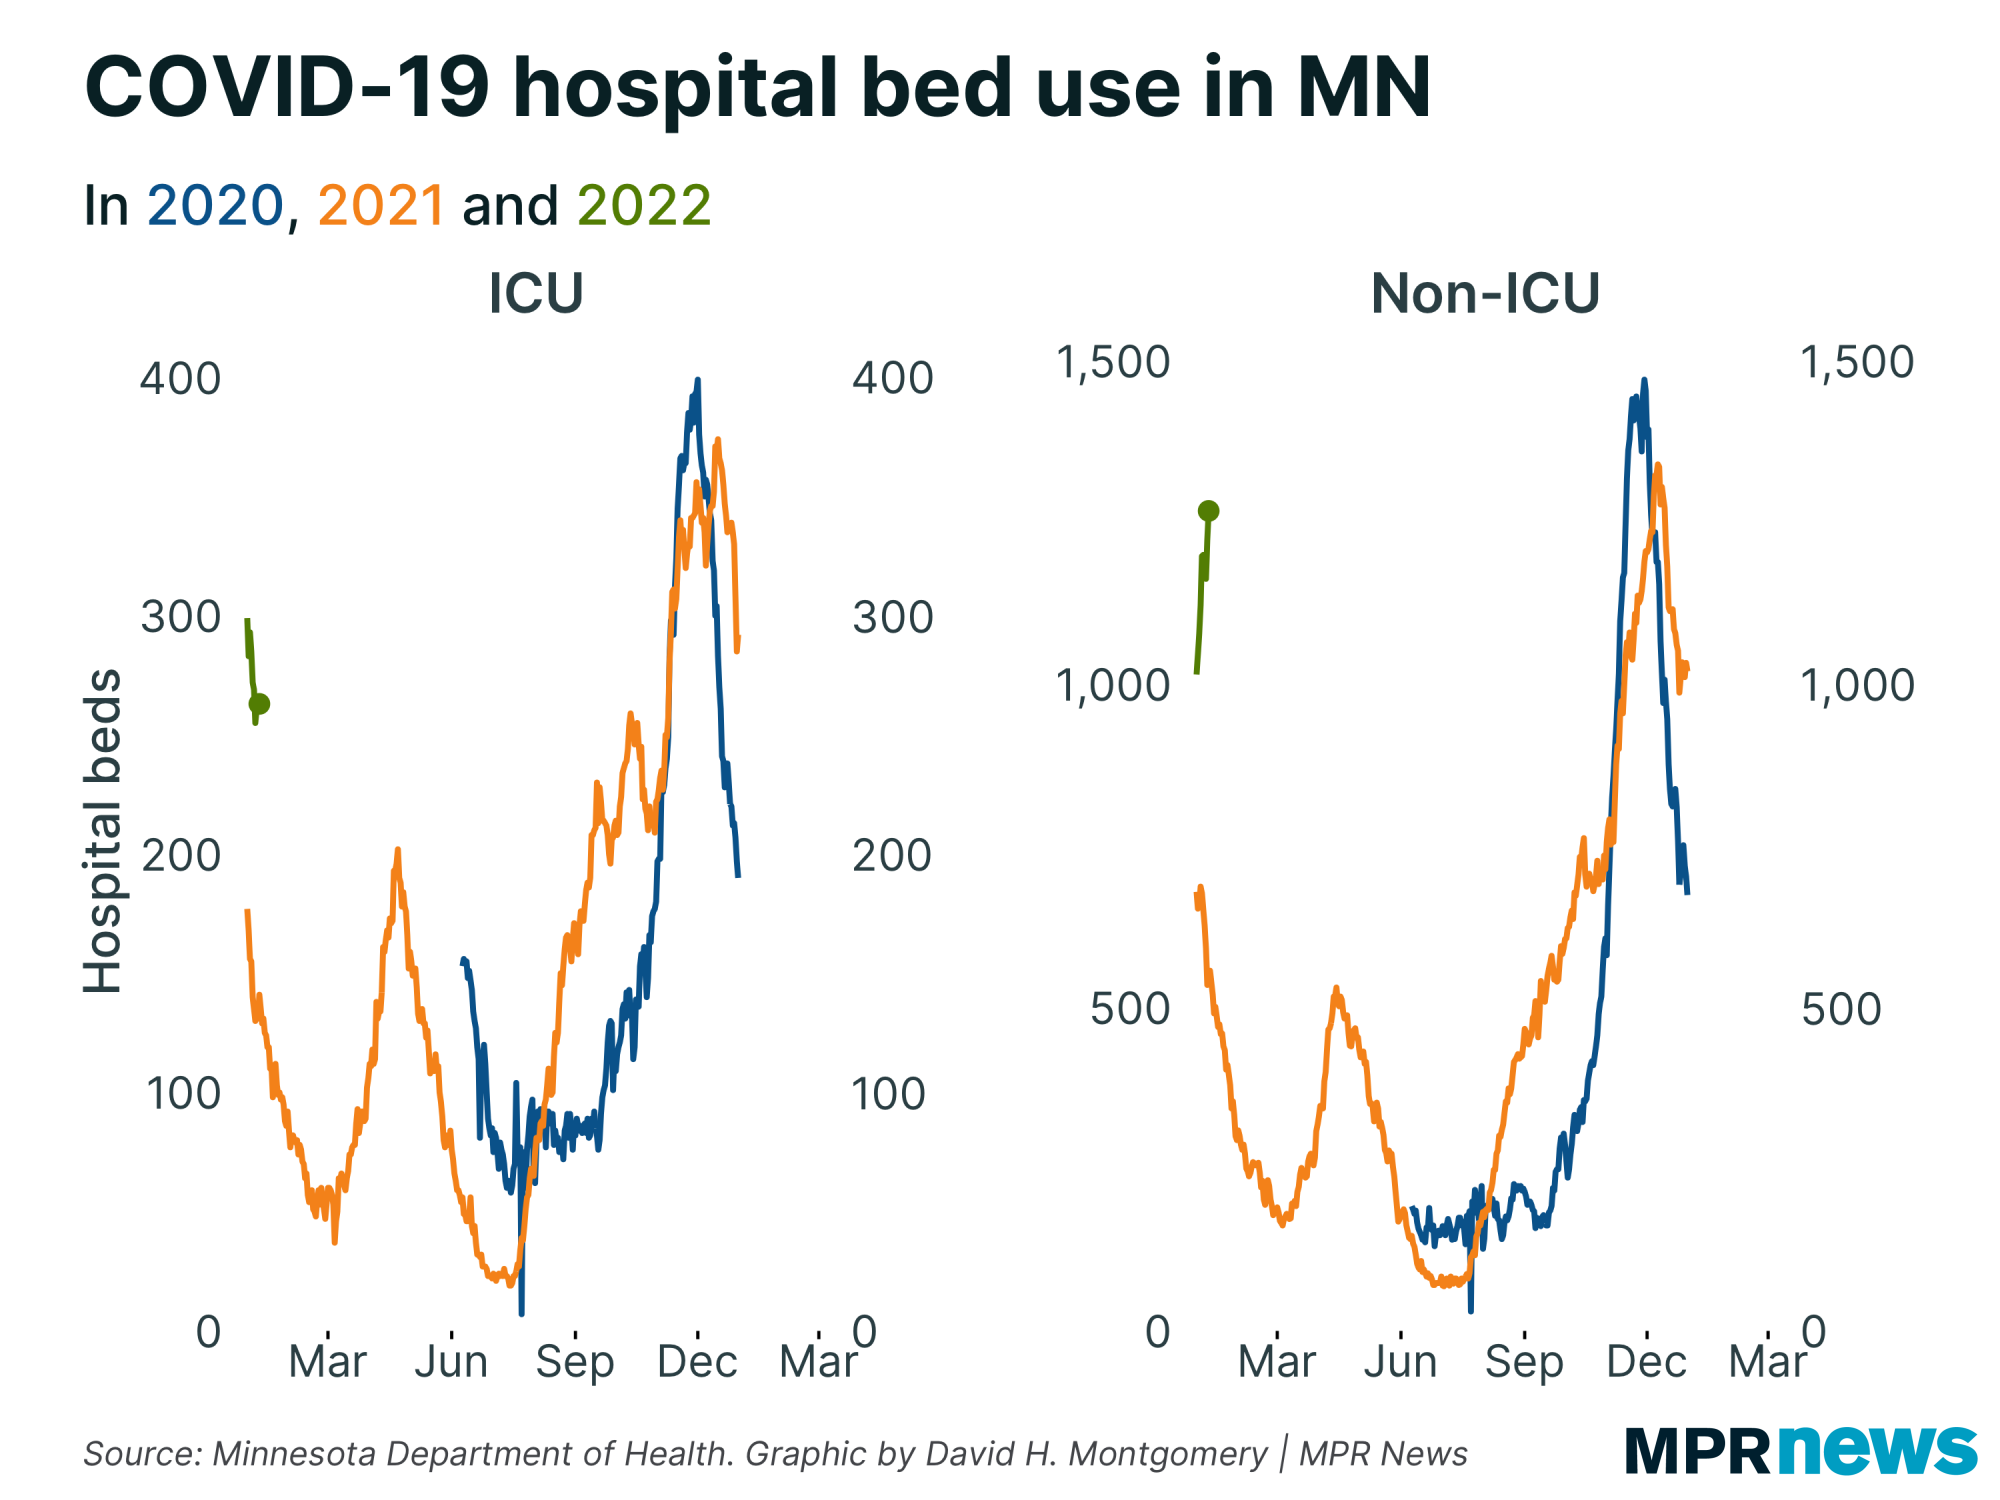 Graph of COVID-19 hospital bed use in Minnesota